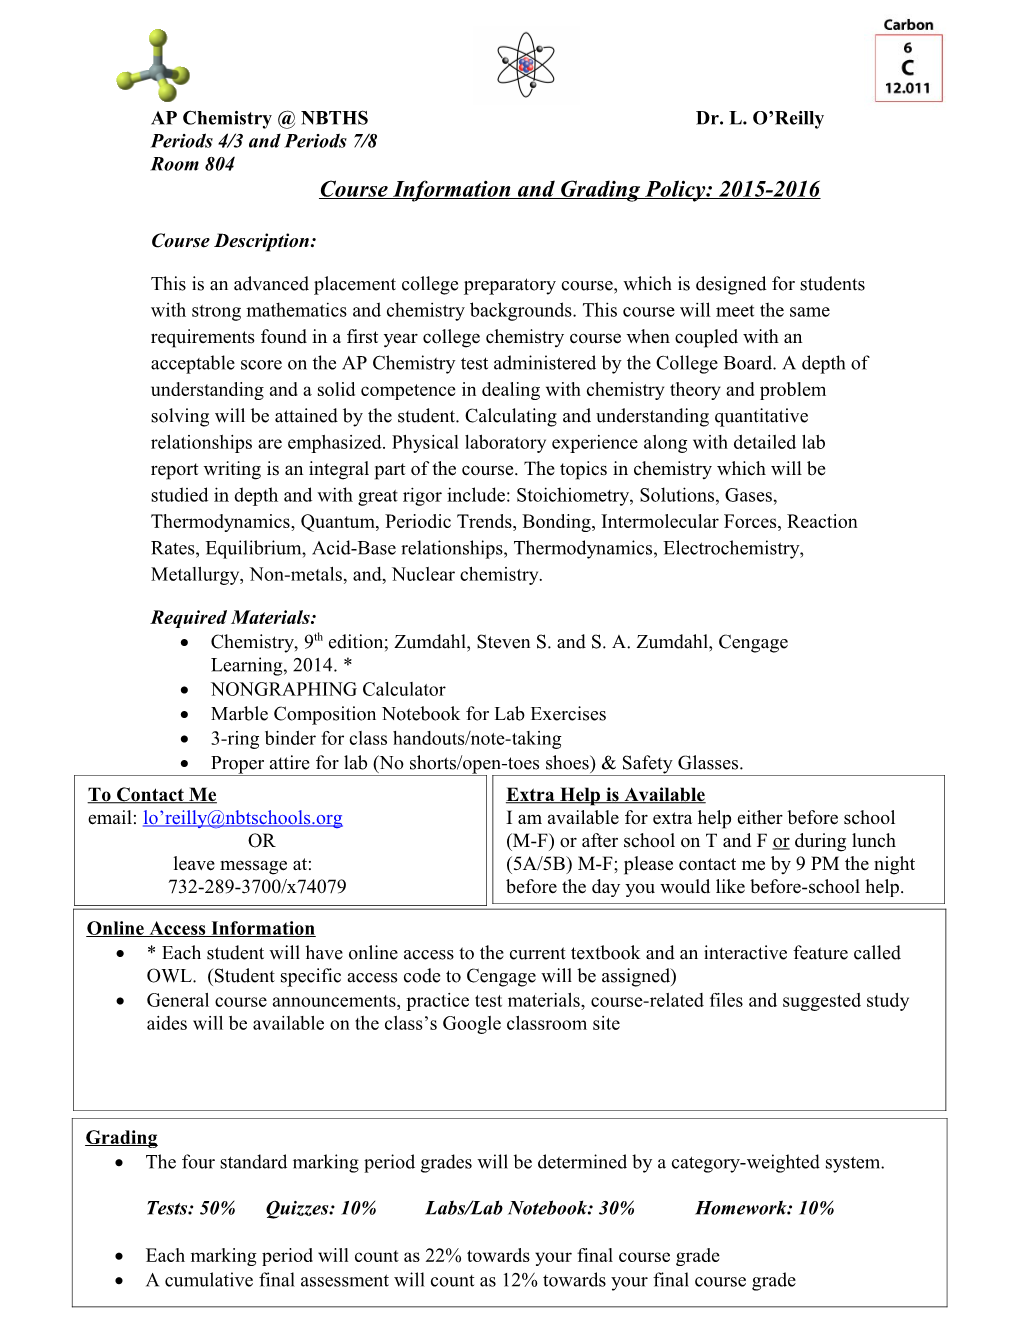 Course Information and Grading Policy: 2015-2016